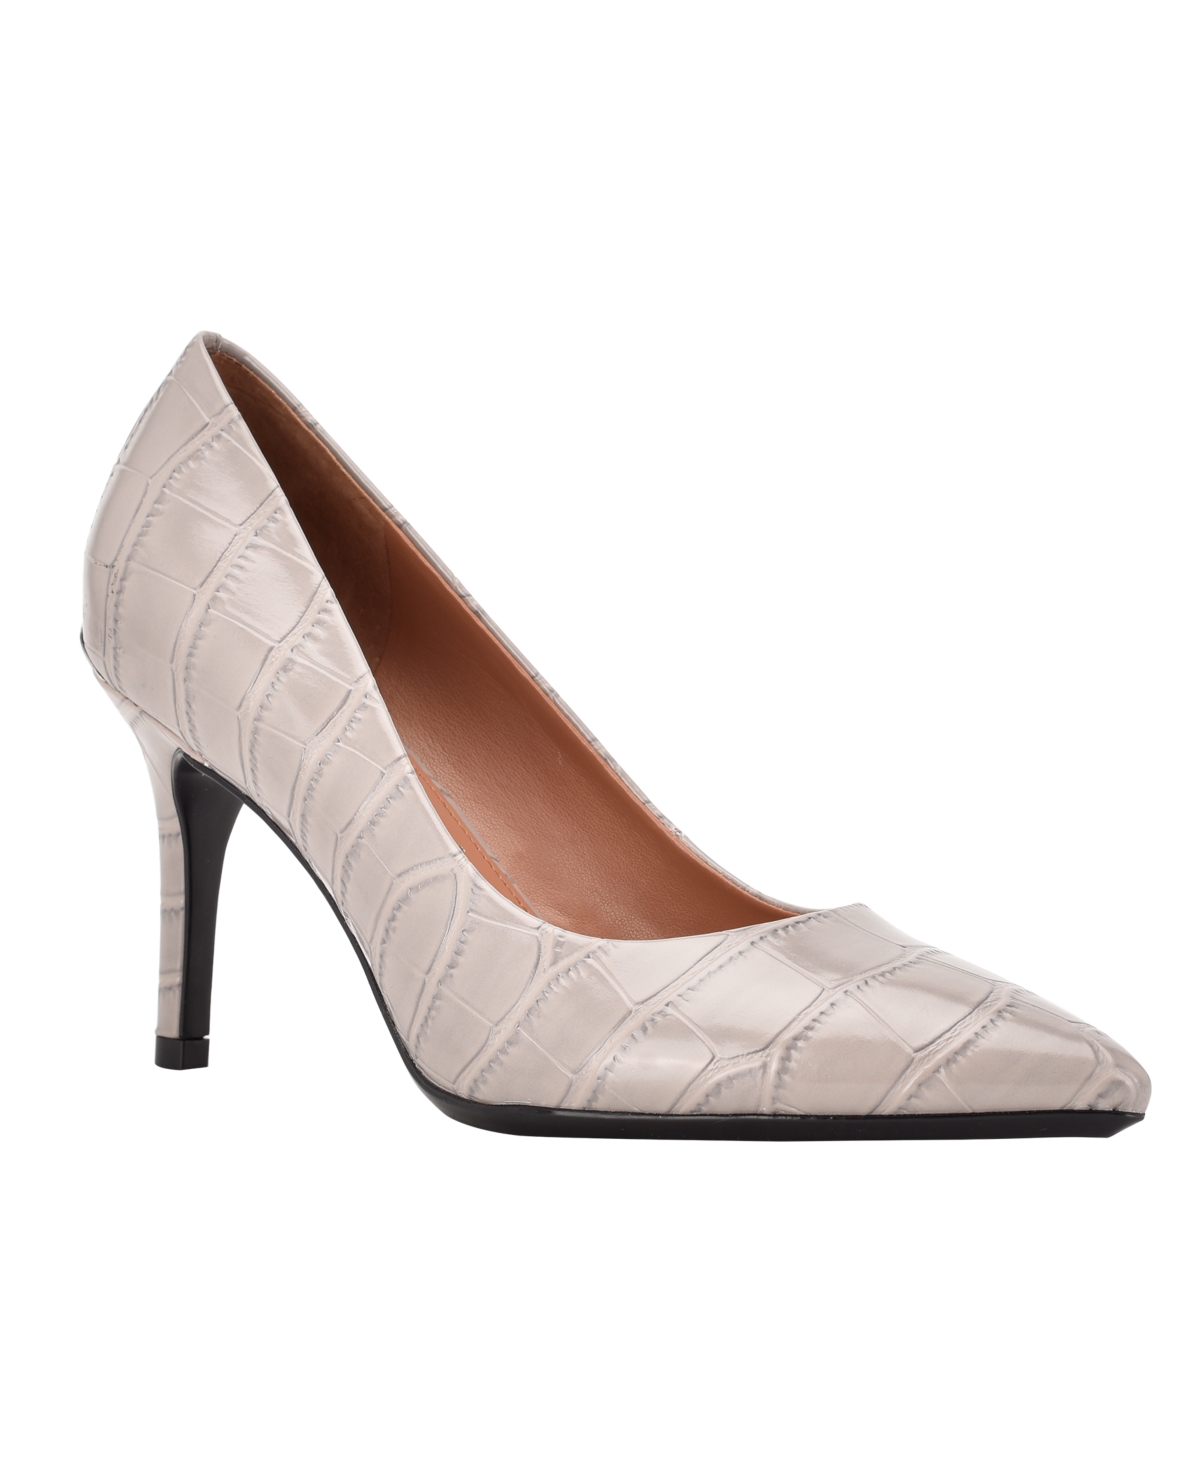 UPC 195972637634 product image for Calvin Klein Women's Gayle Pointy Toe Pumps Women's Shoes | upcitemdb.com